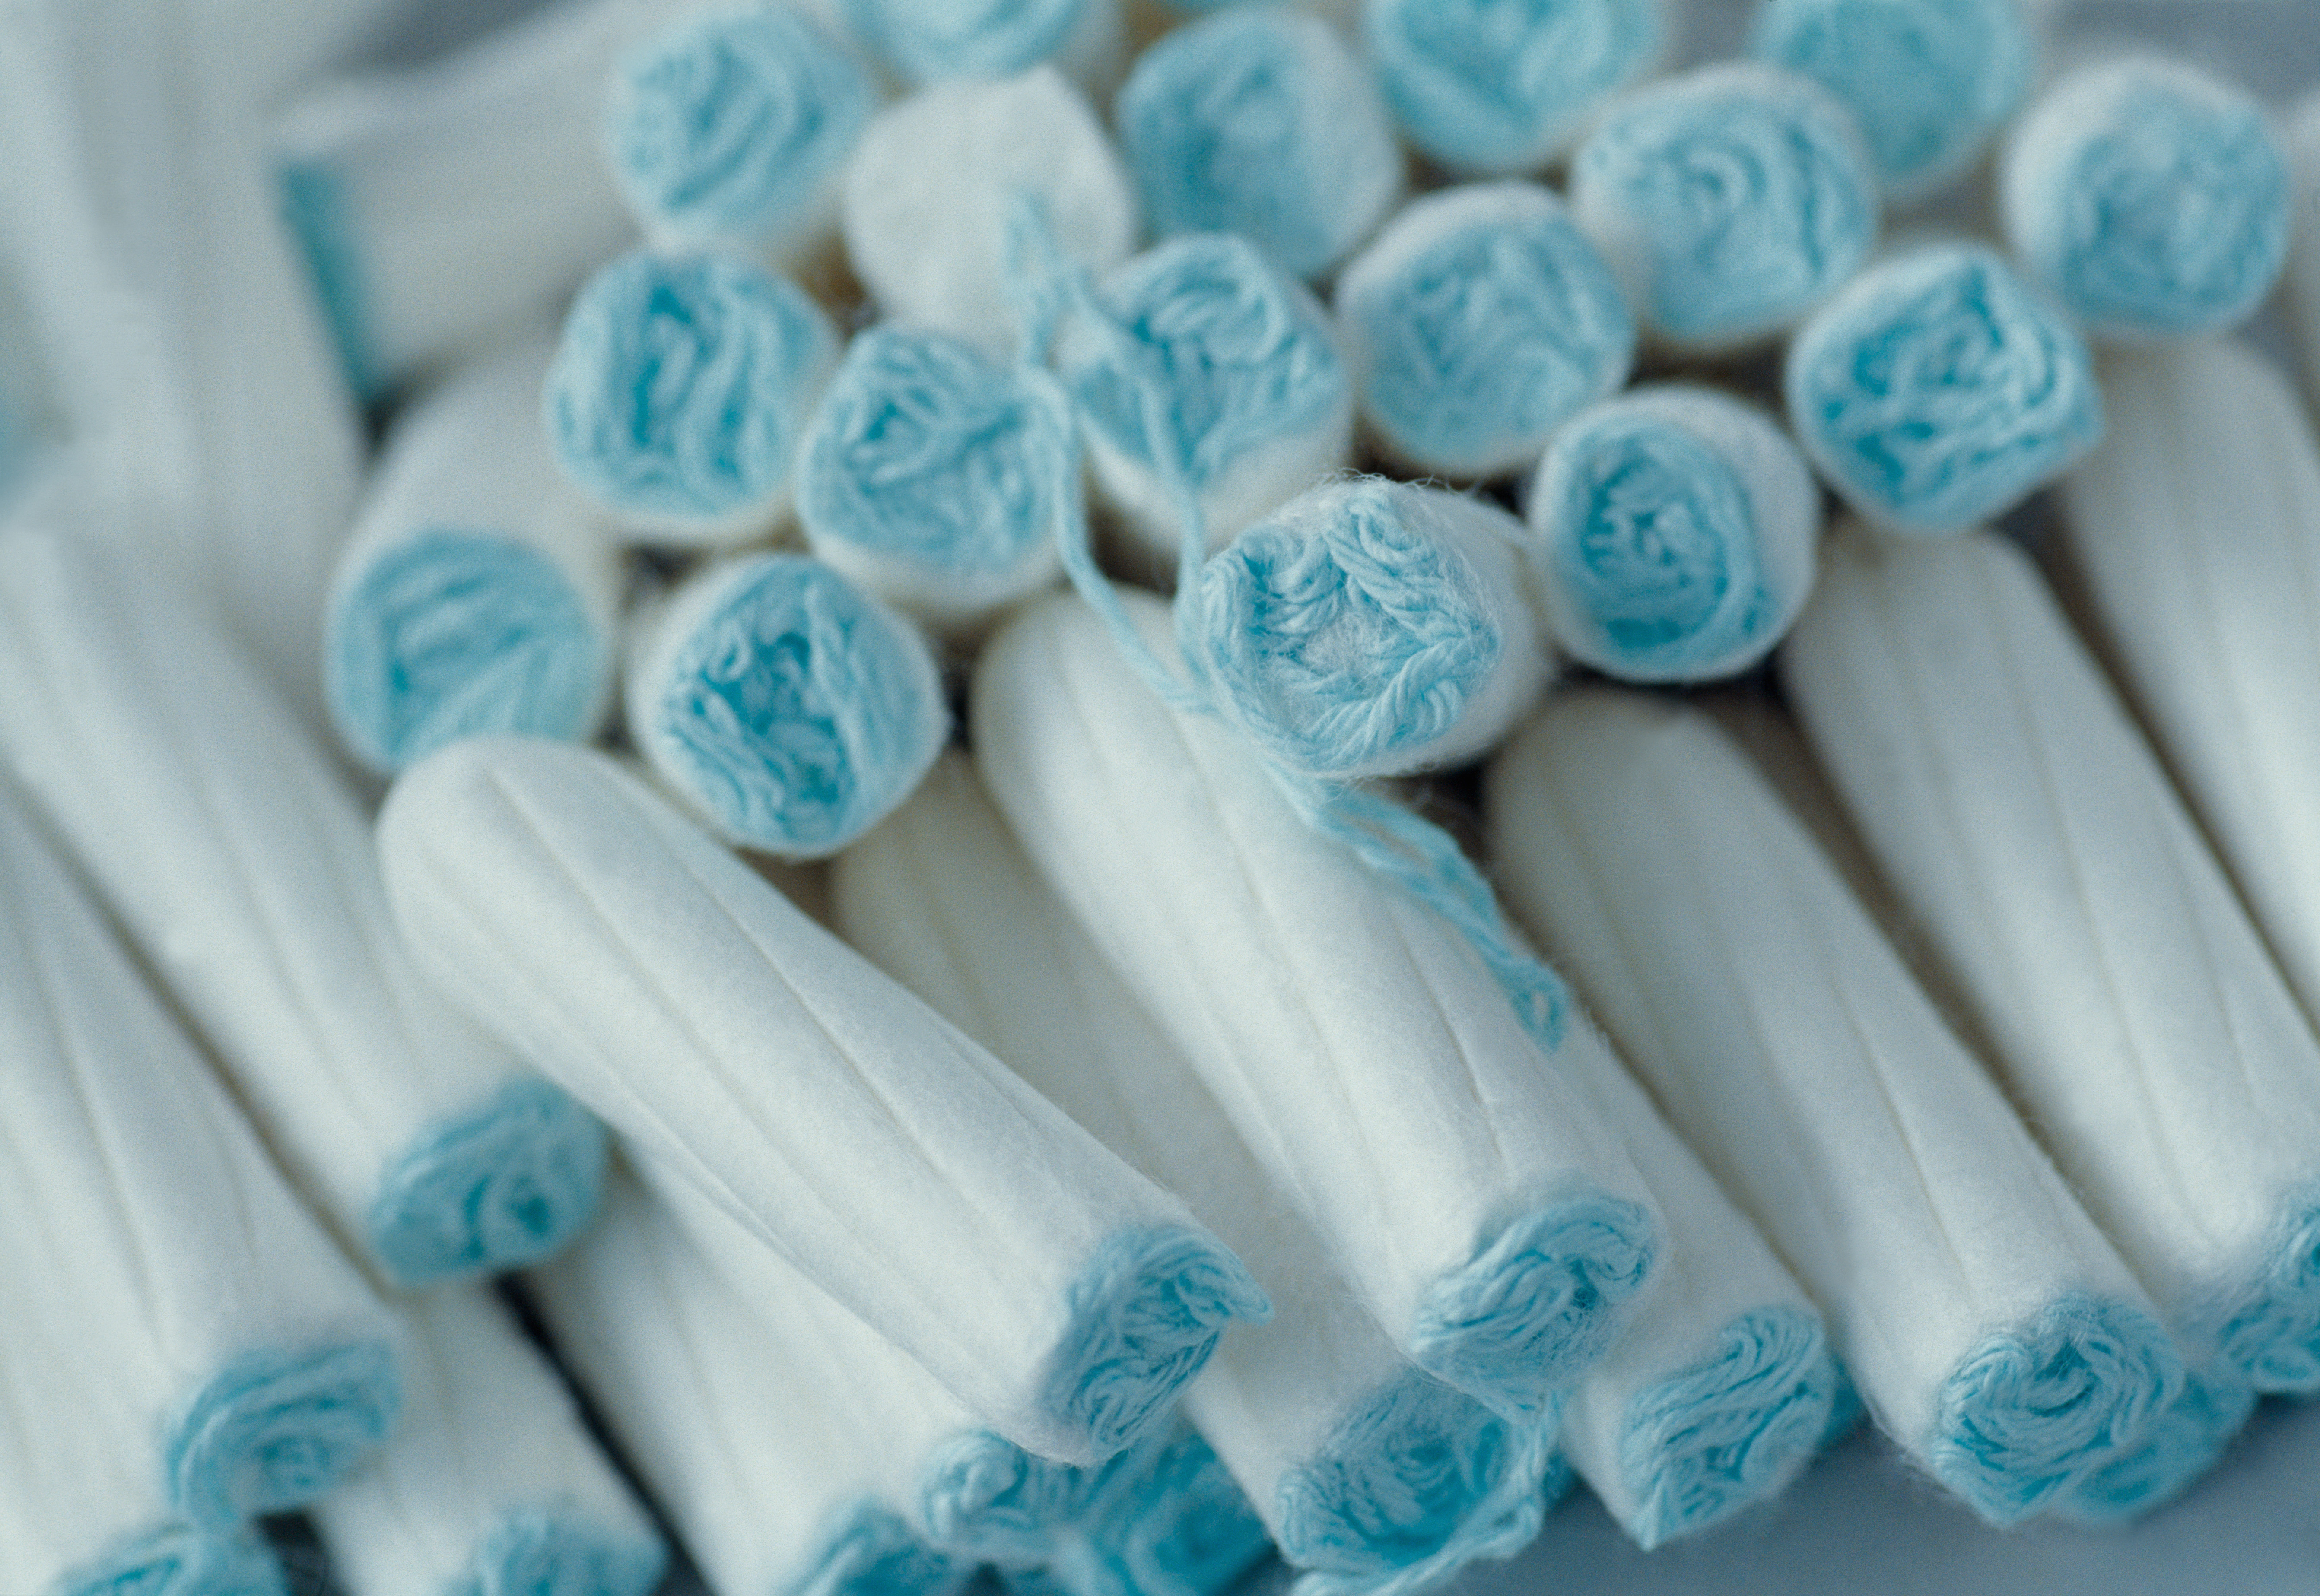 More States Tax Tampons Than Candy in America